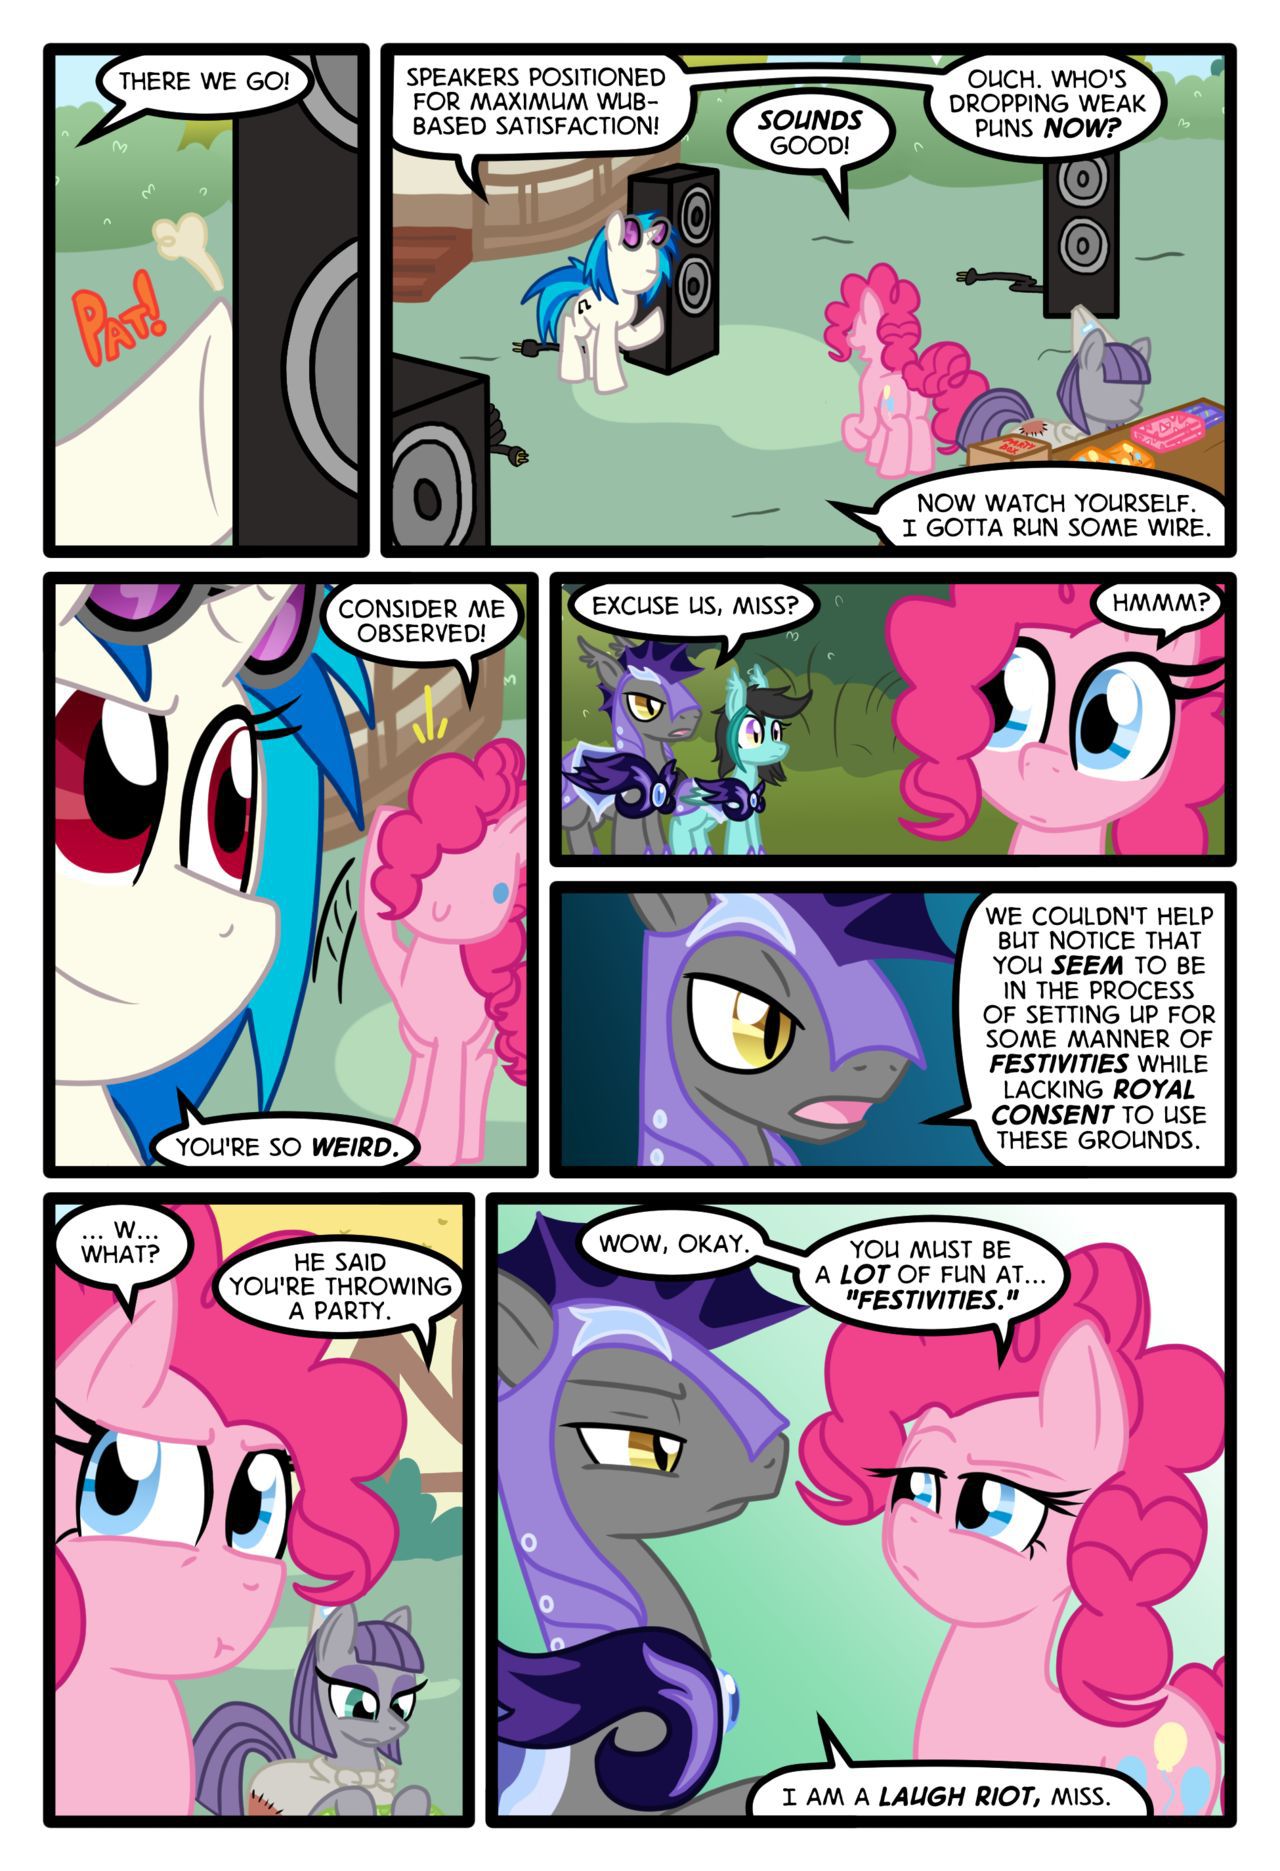 [Zaron] Lonely Hooves (My Little Pony Friendship Is Magic) [Ongoing] 45